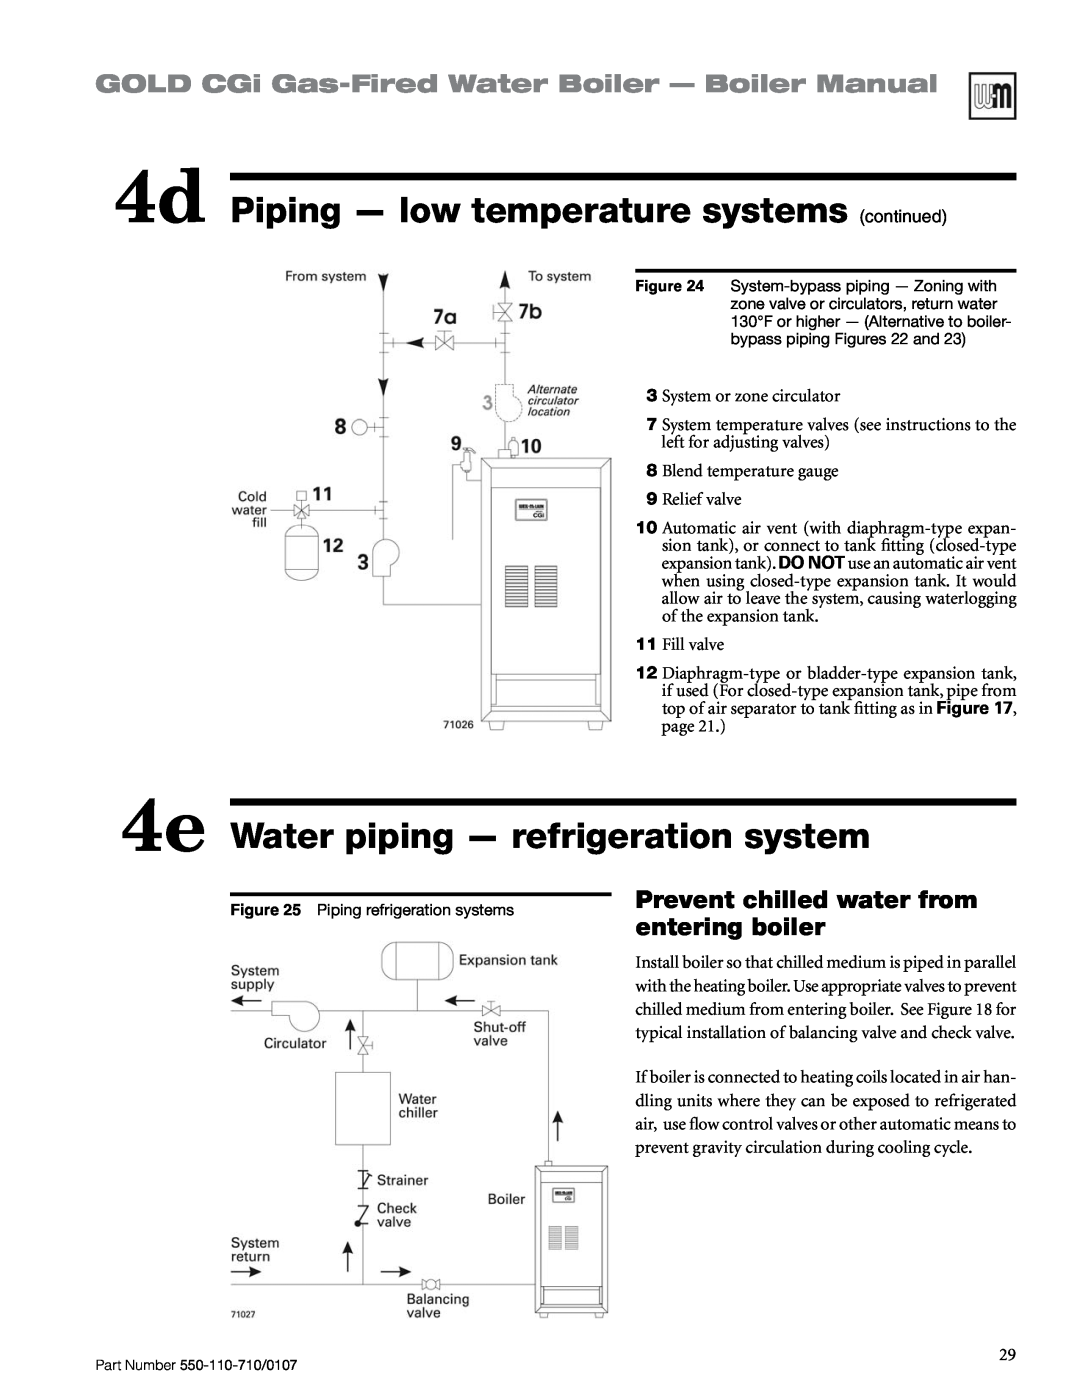 Weil-McLain 550-110-710/0107 manual 4e Water piping — refrigeration system, 4d Piping — low temperature systems continued 